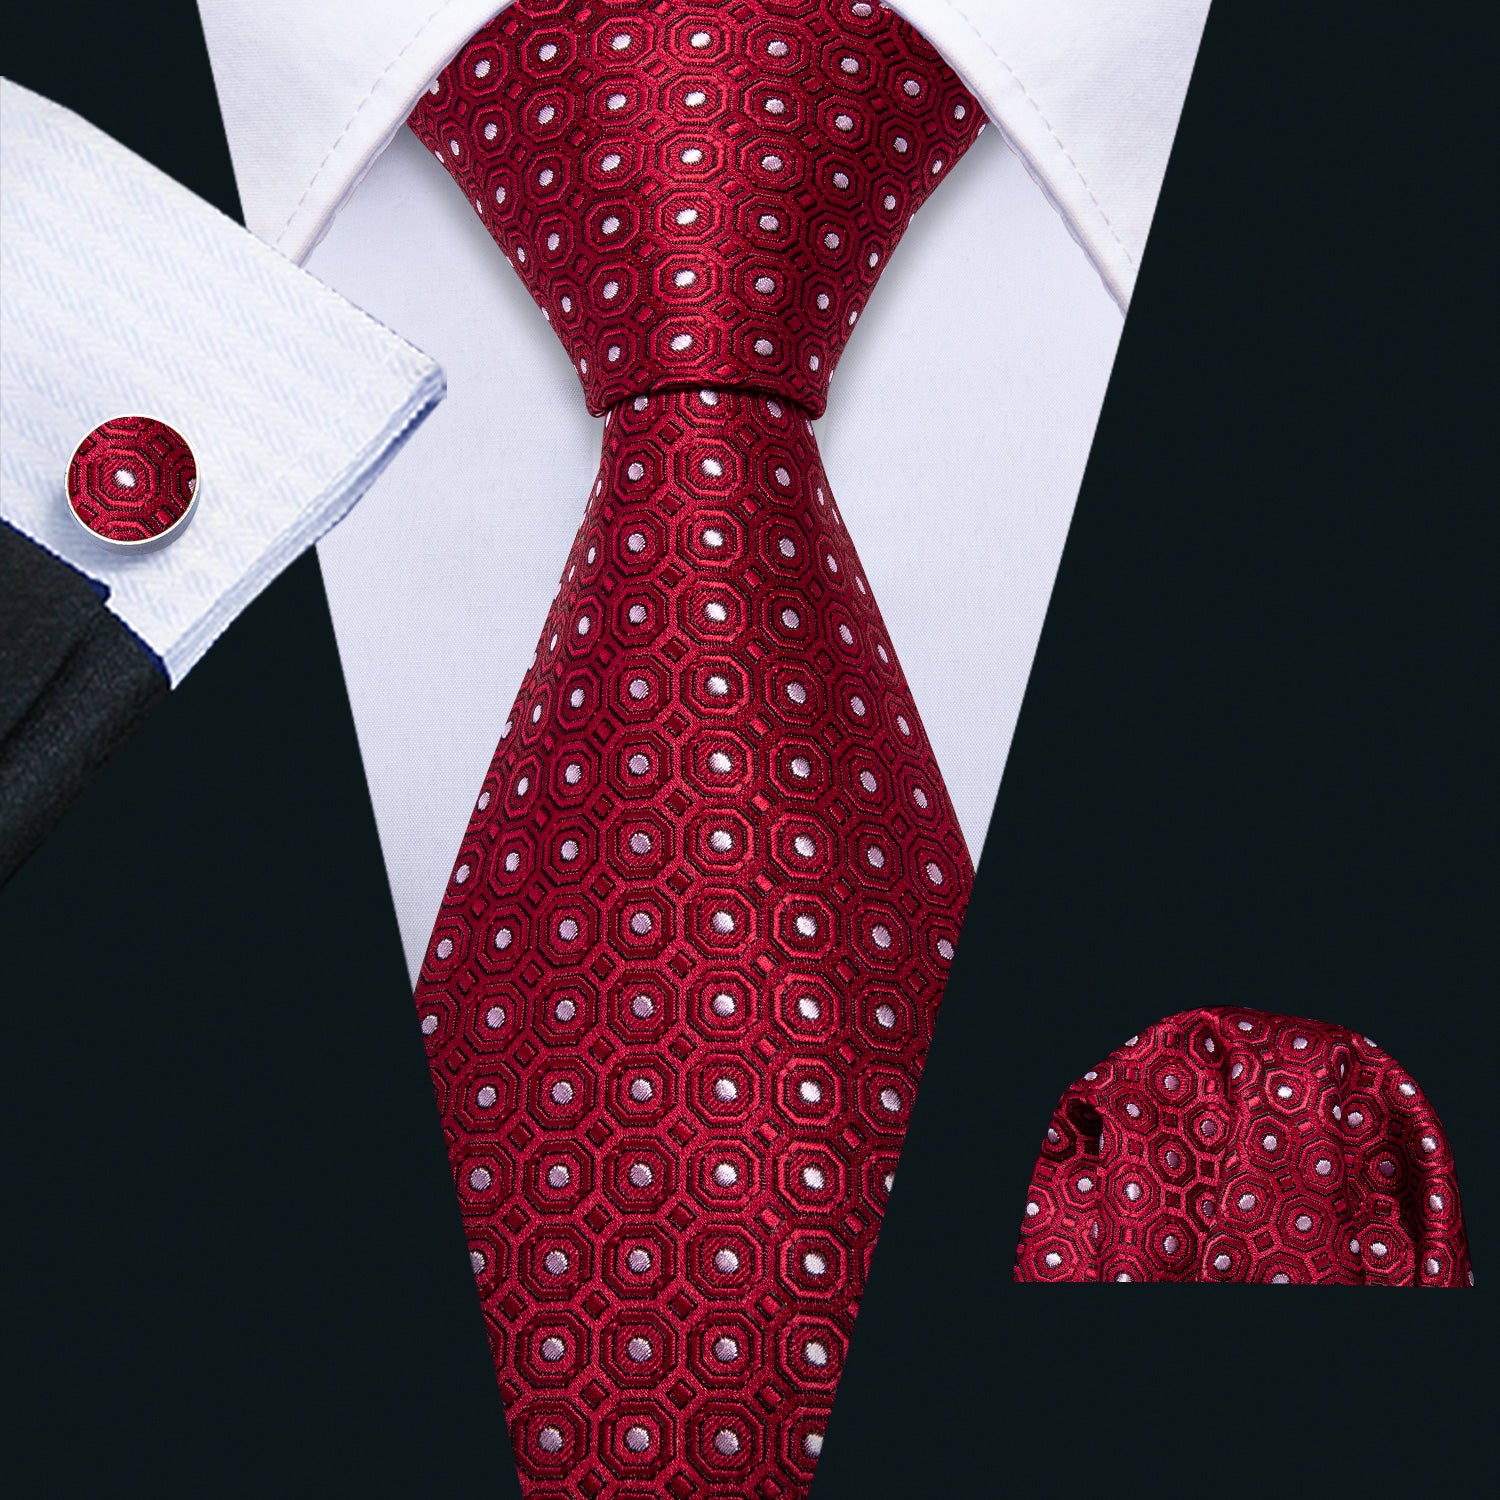 Barry.wang Red Tie White Dot Silk Tie Pocket Square Cufflinks Set for Men